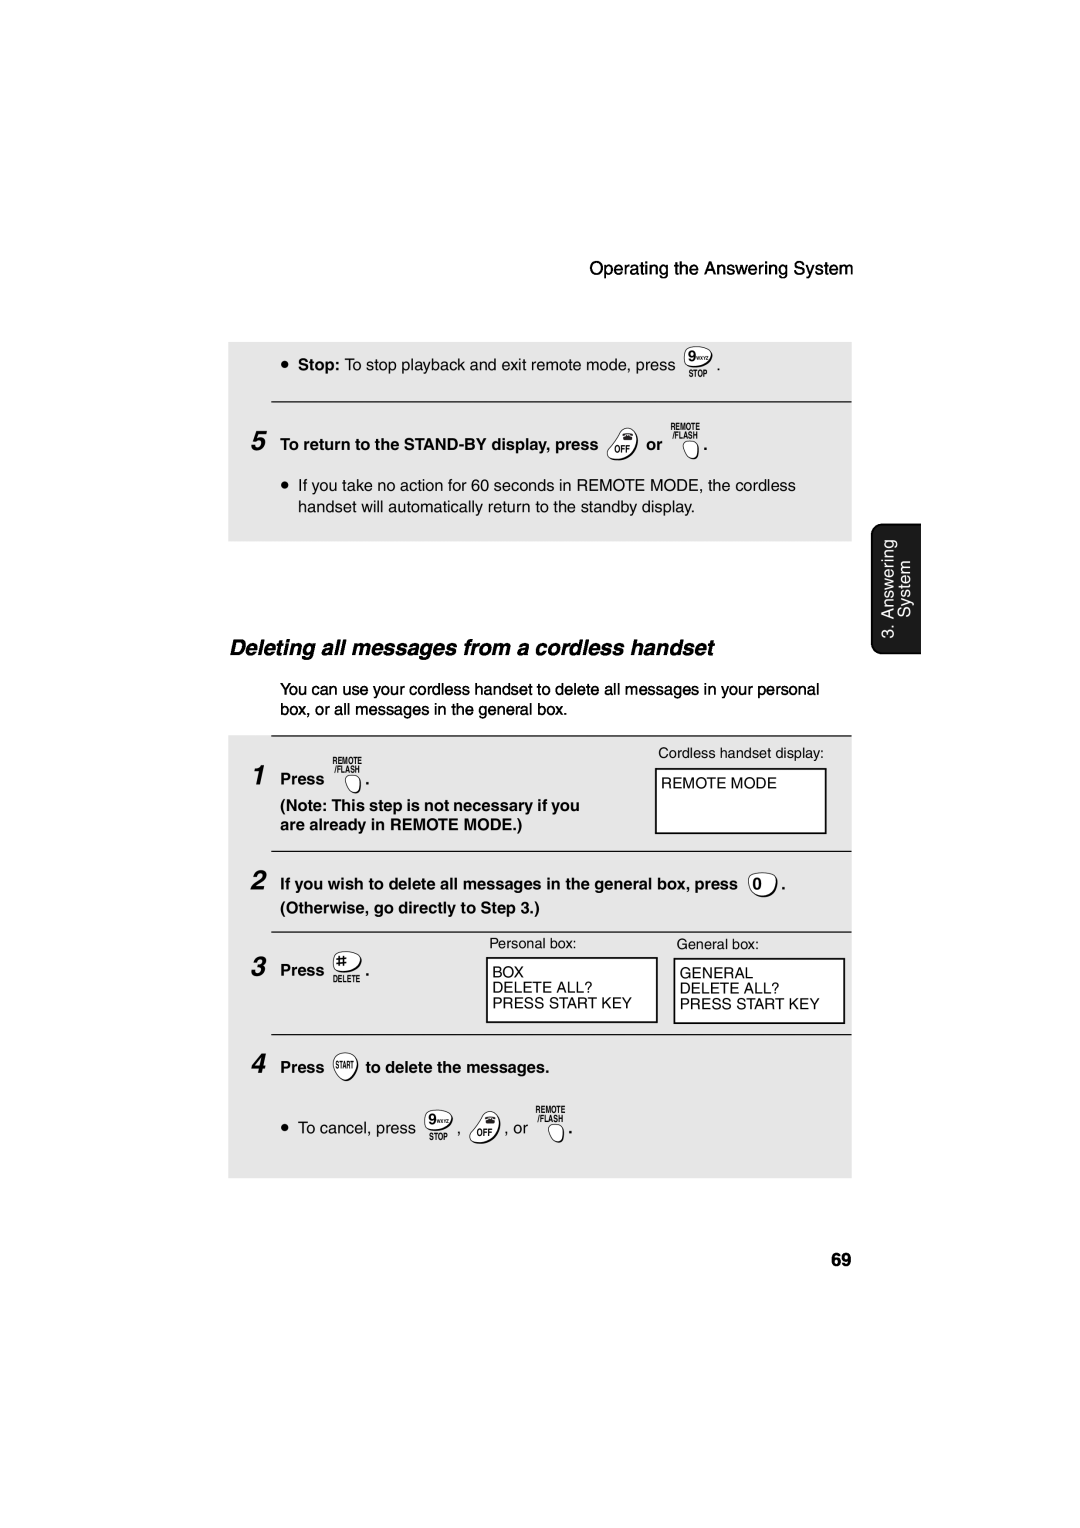 Sharp UX-CD600 operation manual Deleting all messages from a cordless handset, Answering, System 